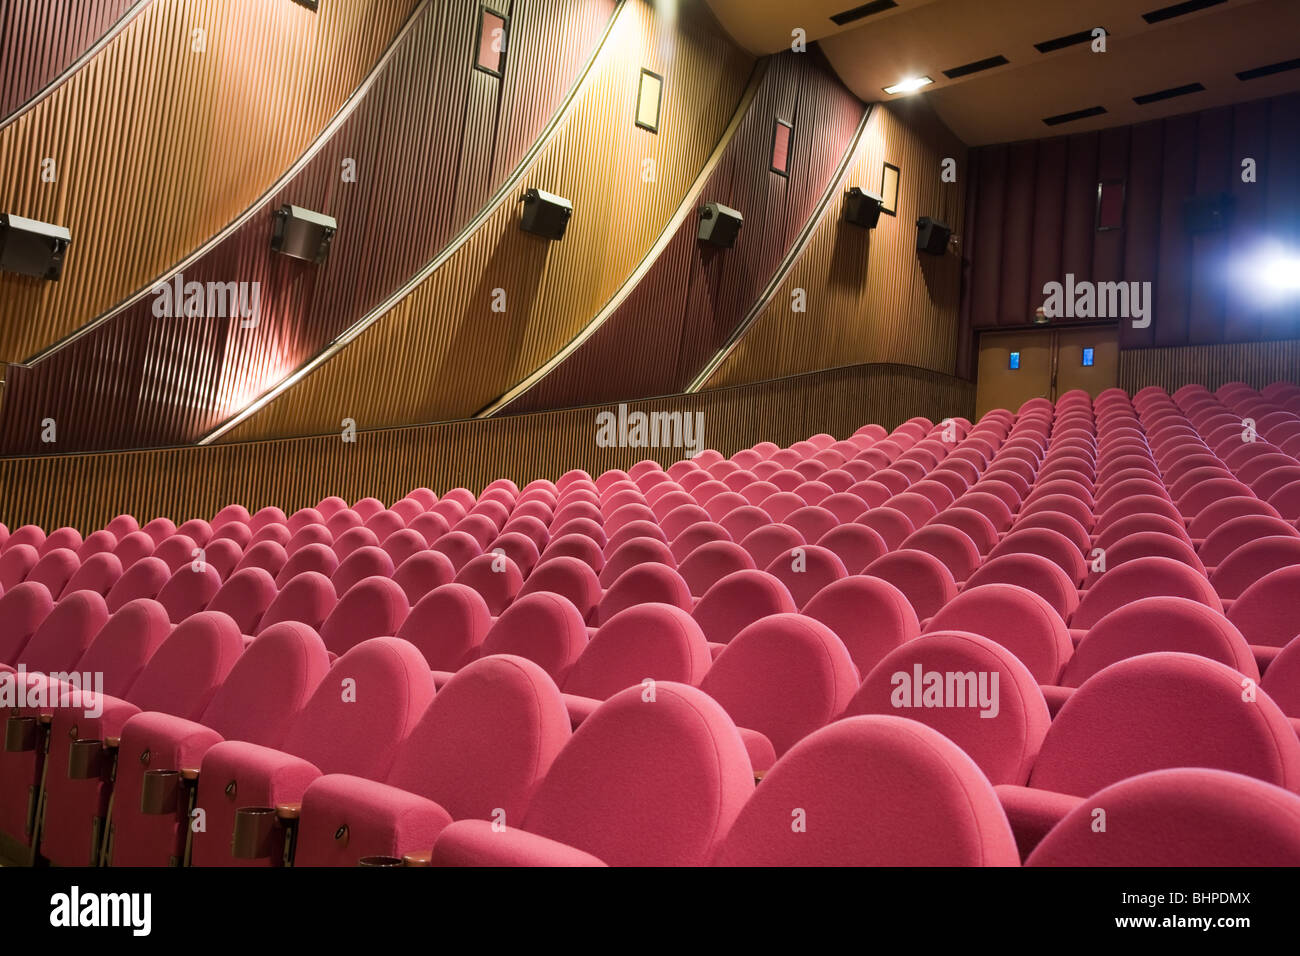 Empty cinema auditorium with light beam from projector. Stock Photo